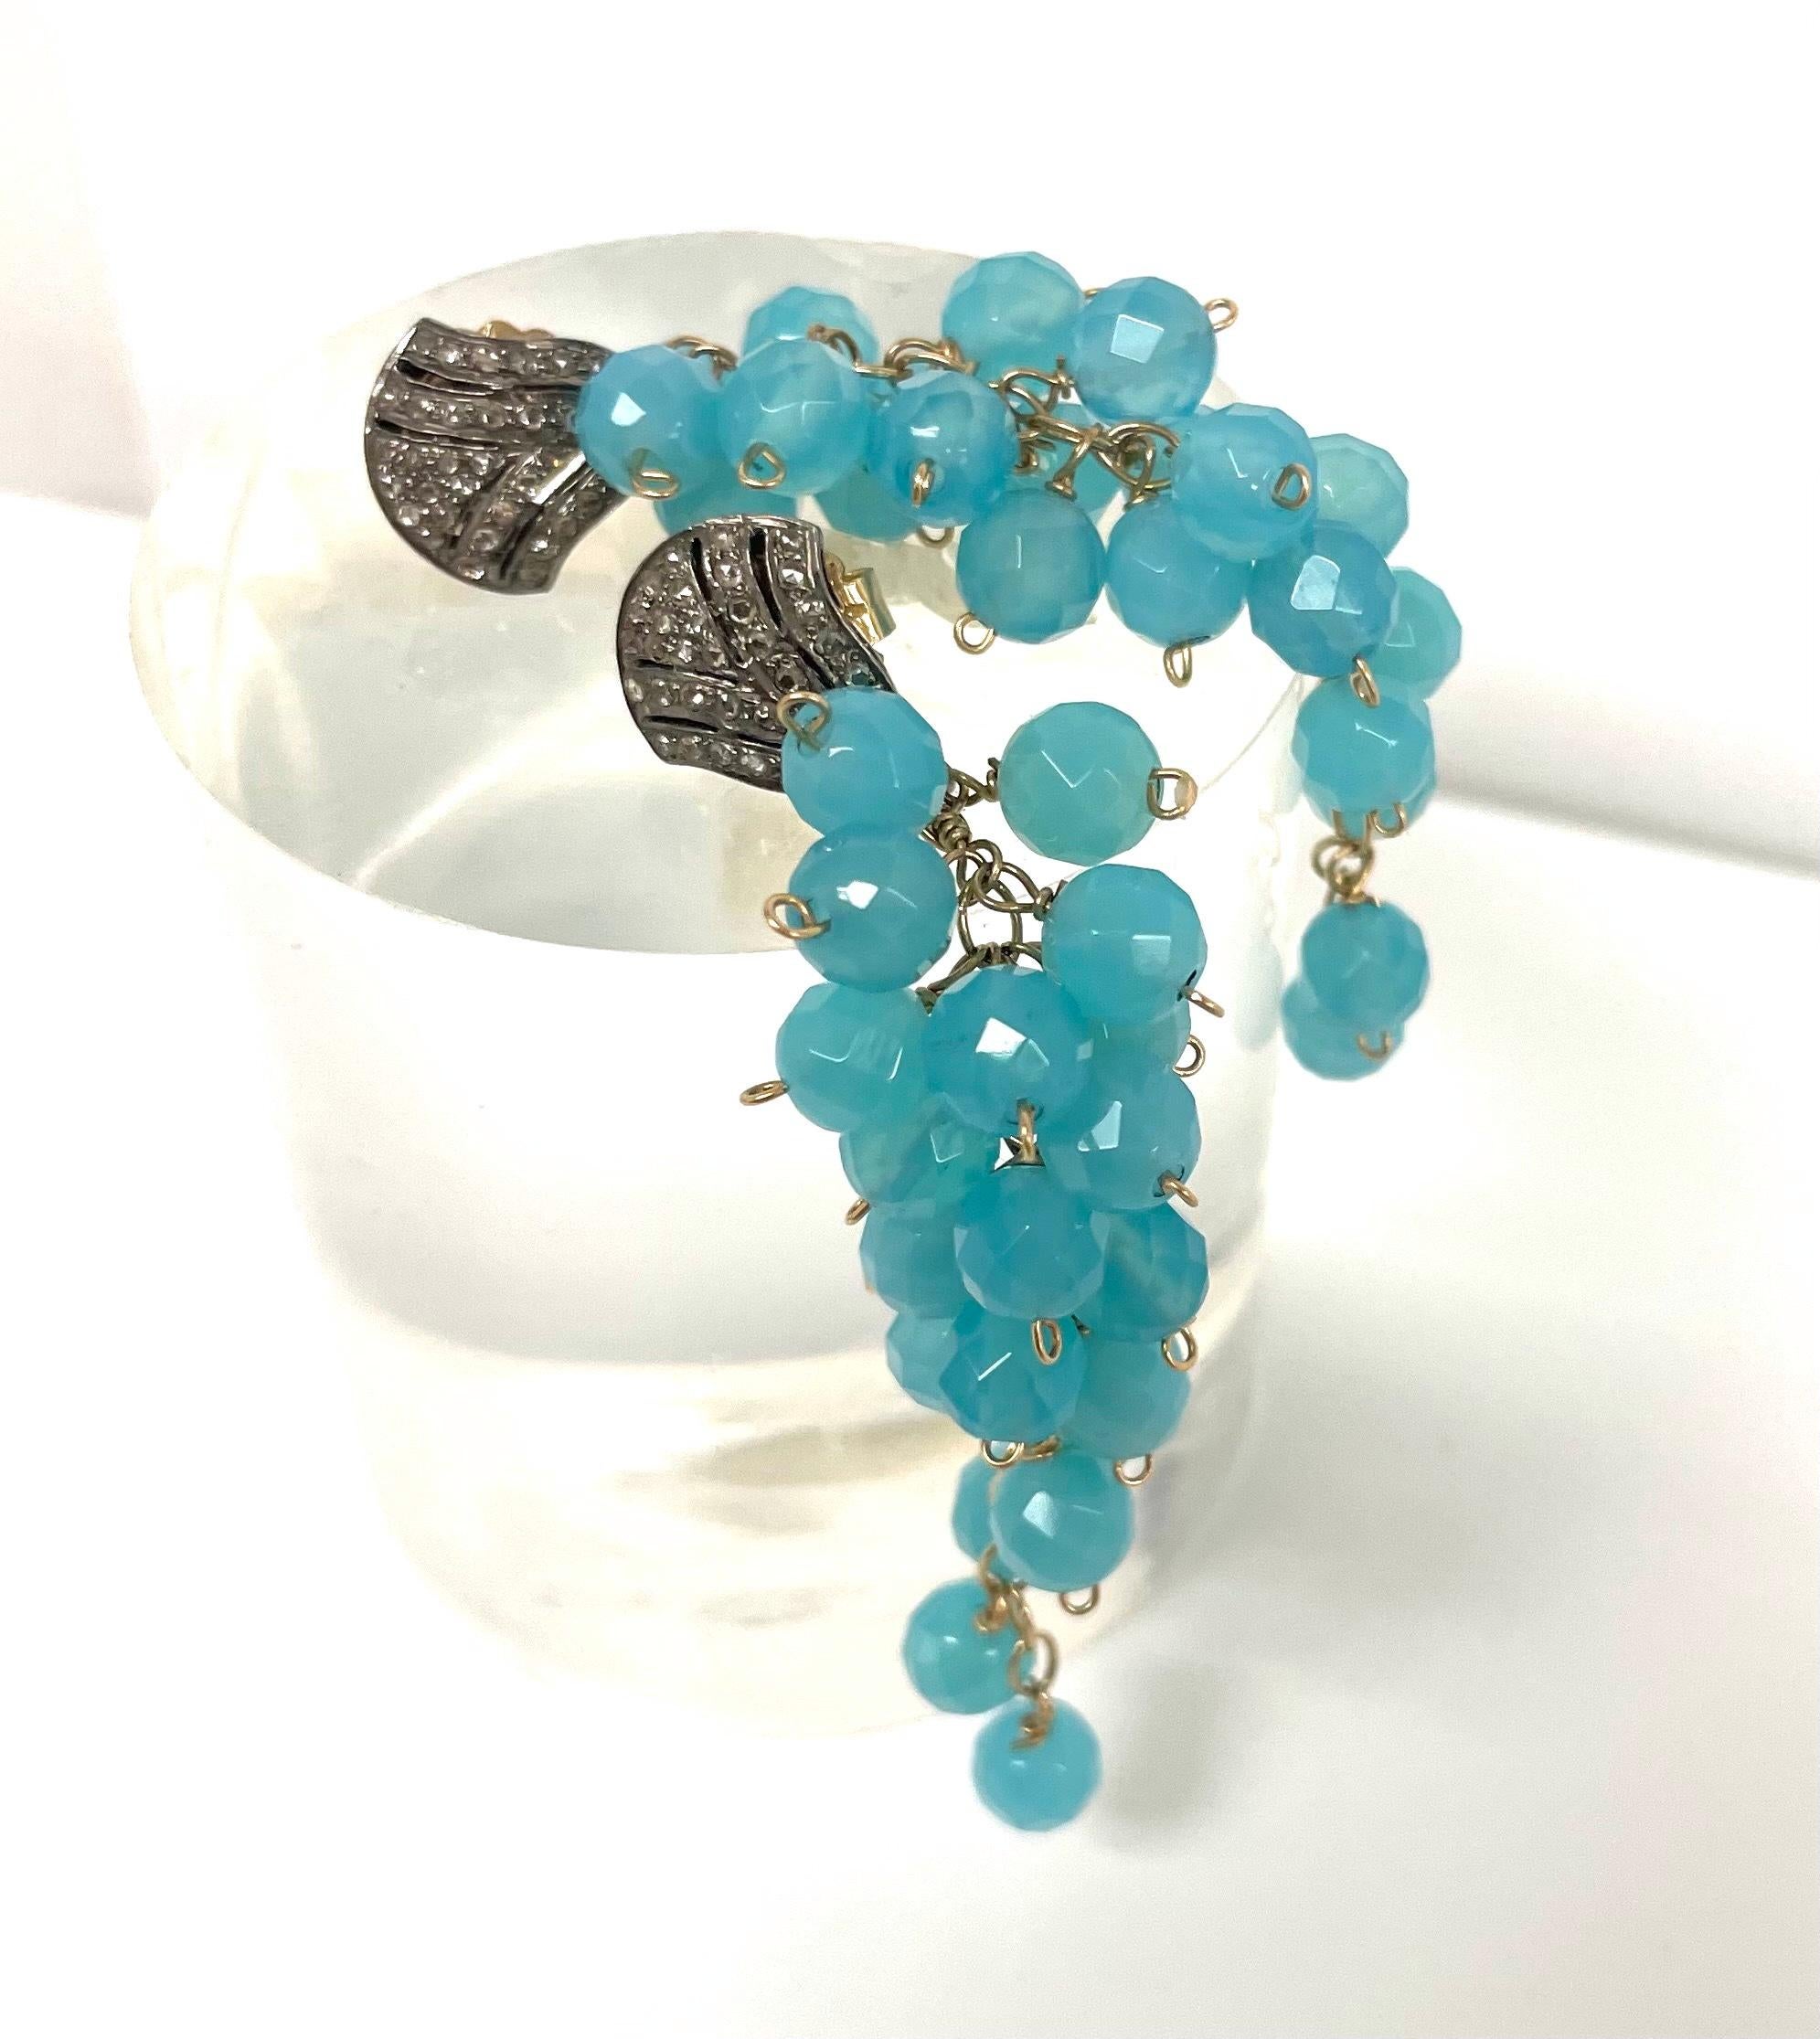 Description
Beautiful, vivid and calming Aqua Chalcedony individually wire wrapped creating a cascading cluster, crowned with pave diamond studs for an overall harmonious and feminine style.
Item # E2955
To make a statement, pair it with necklace